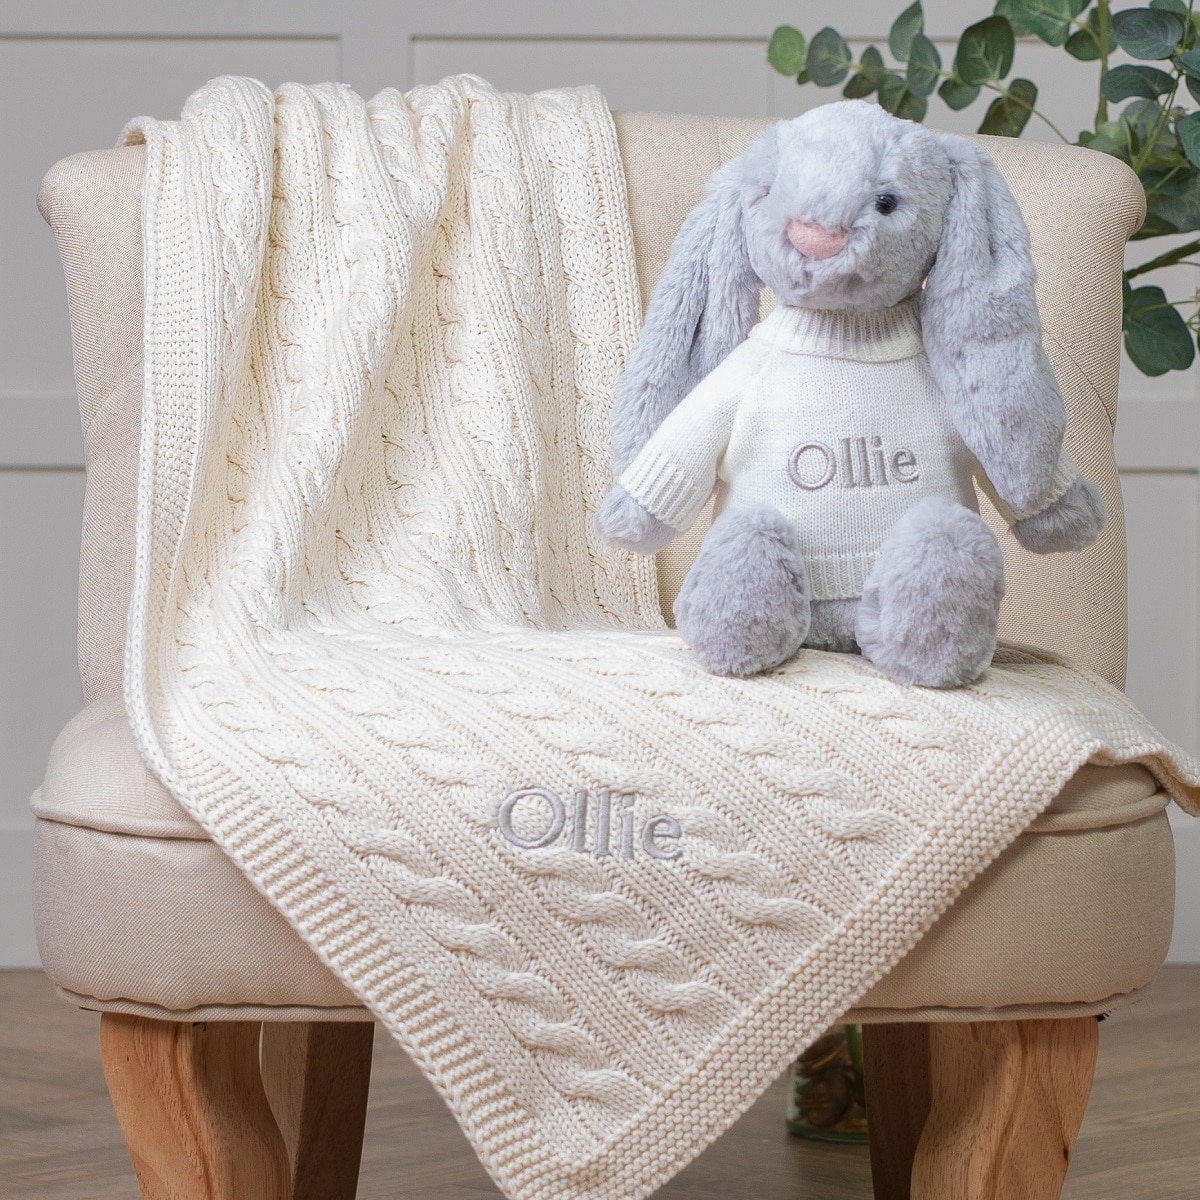 Personalised Toffee Moon luxury cable baby blanket and Jellycat bashful bunny set in grey/cream